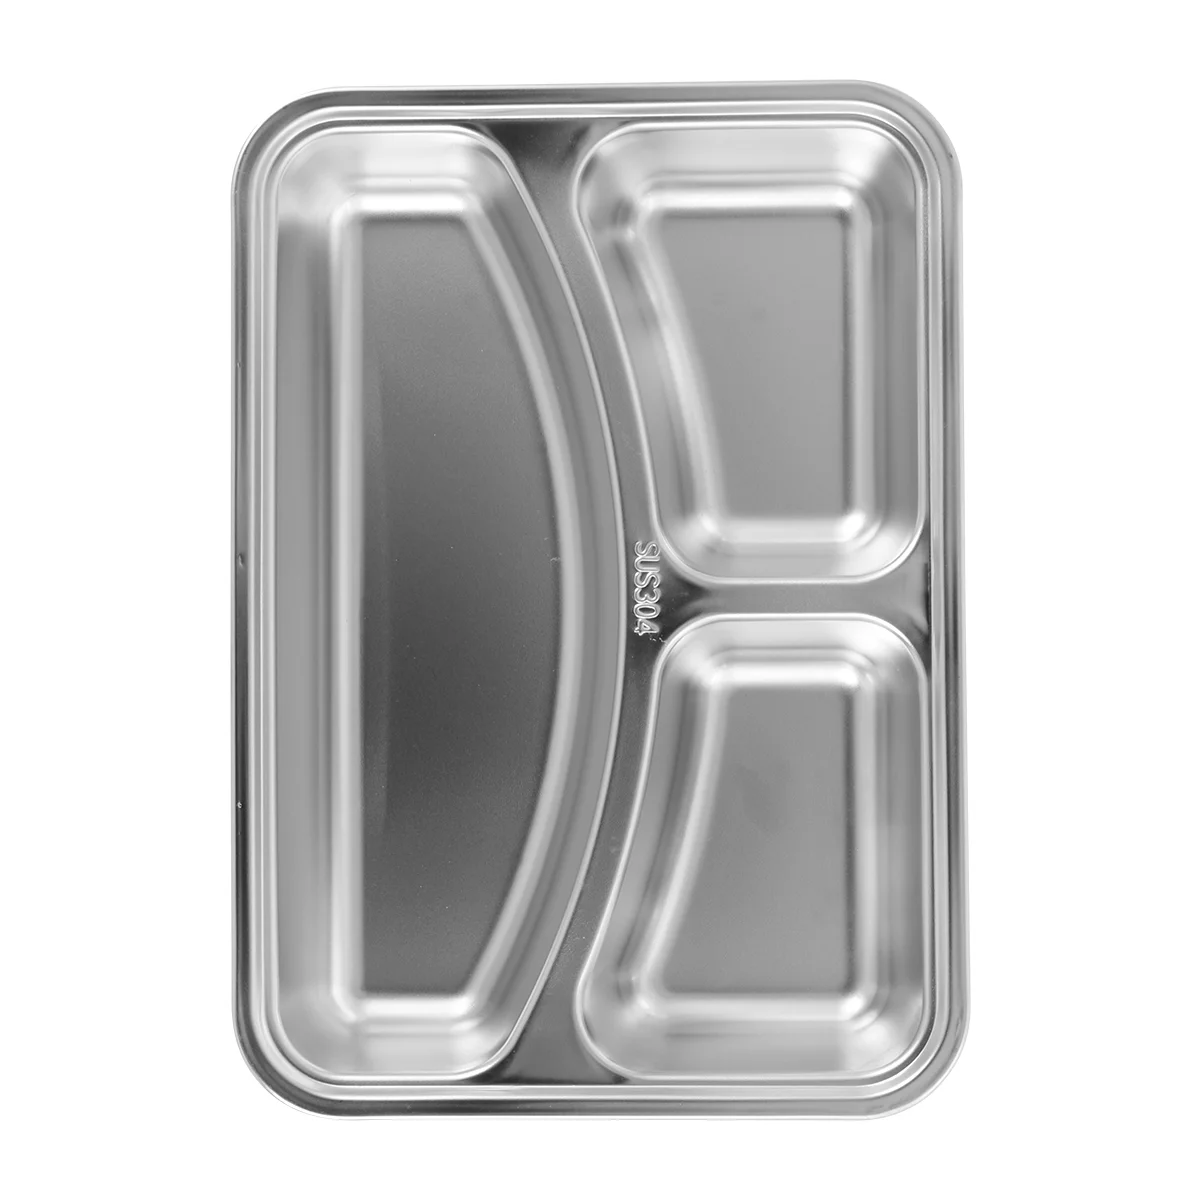 

Stainless Steel Divided Plates 3 Sections Dinner Plate Portion Control Disah Trays Metal Camping Serving Trays for School